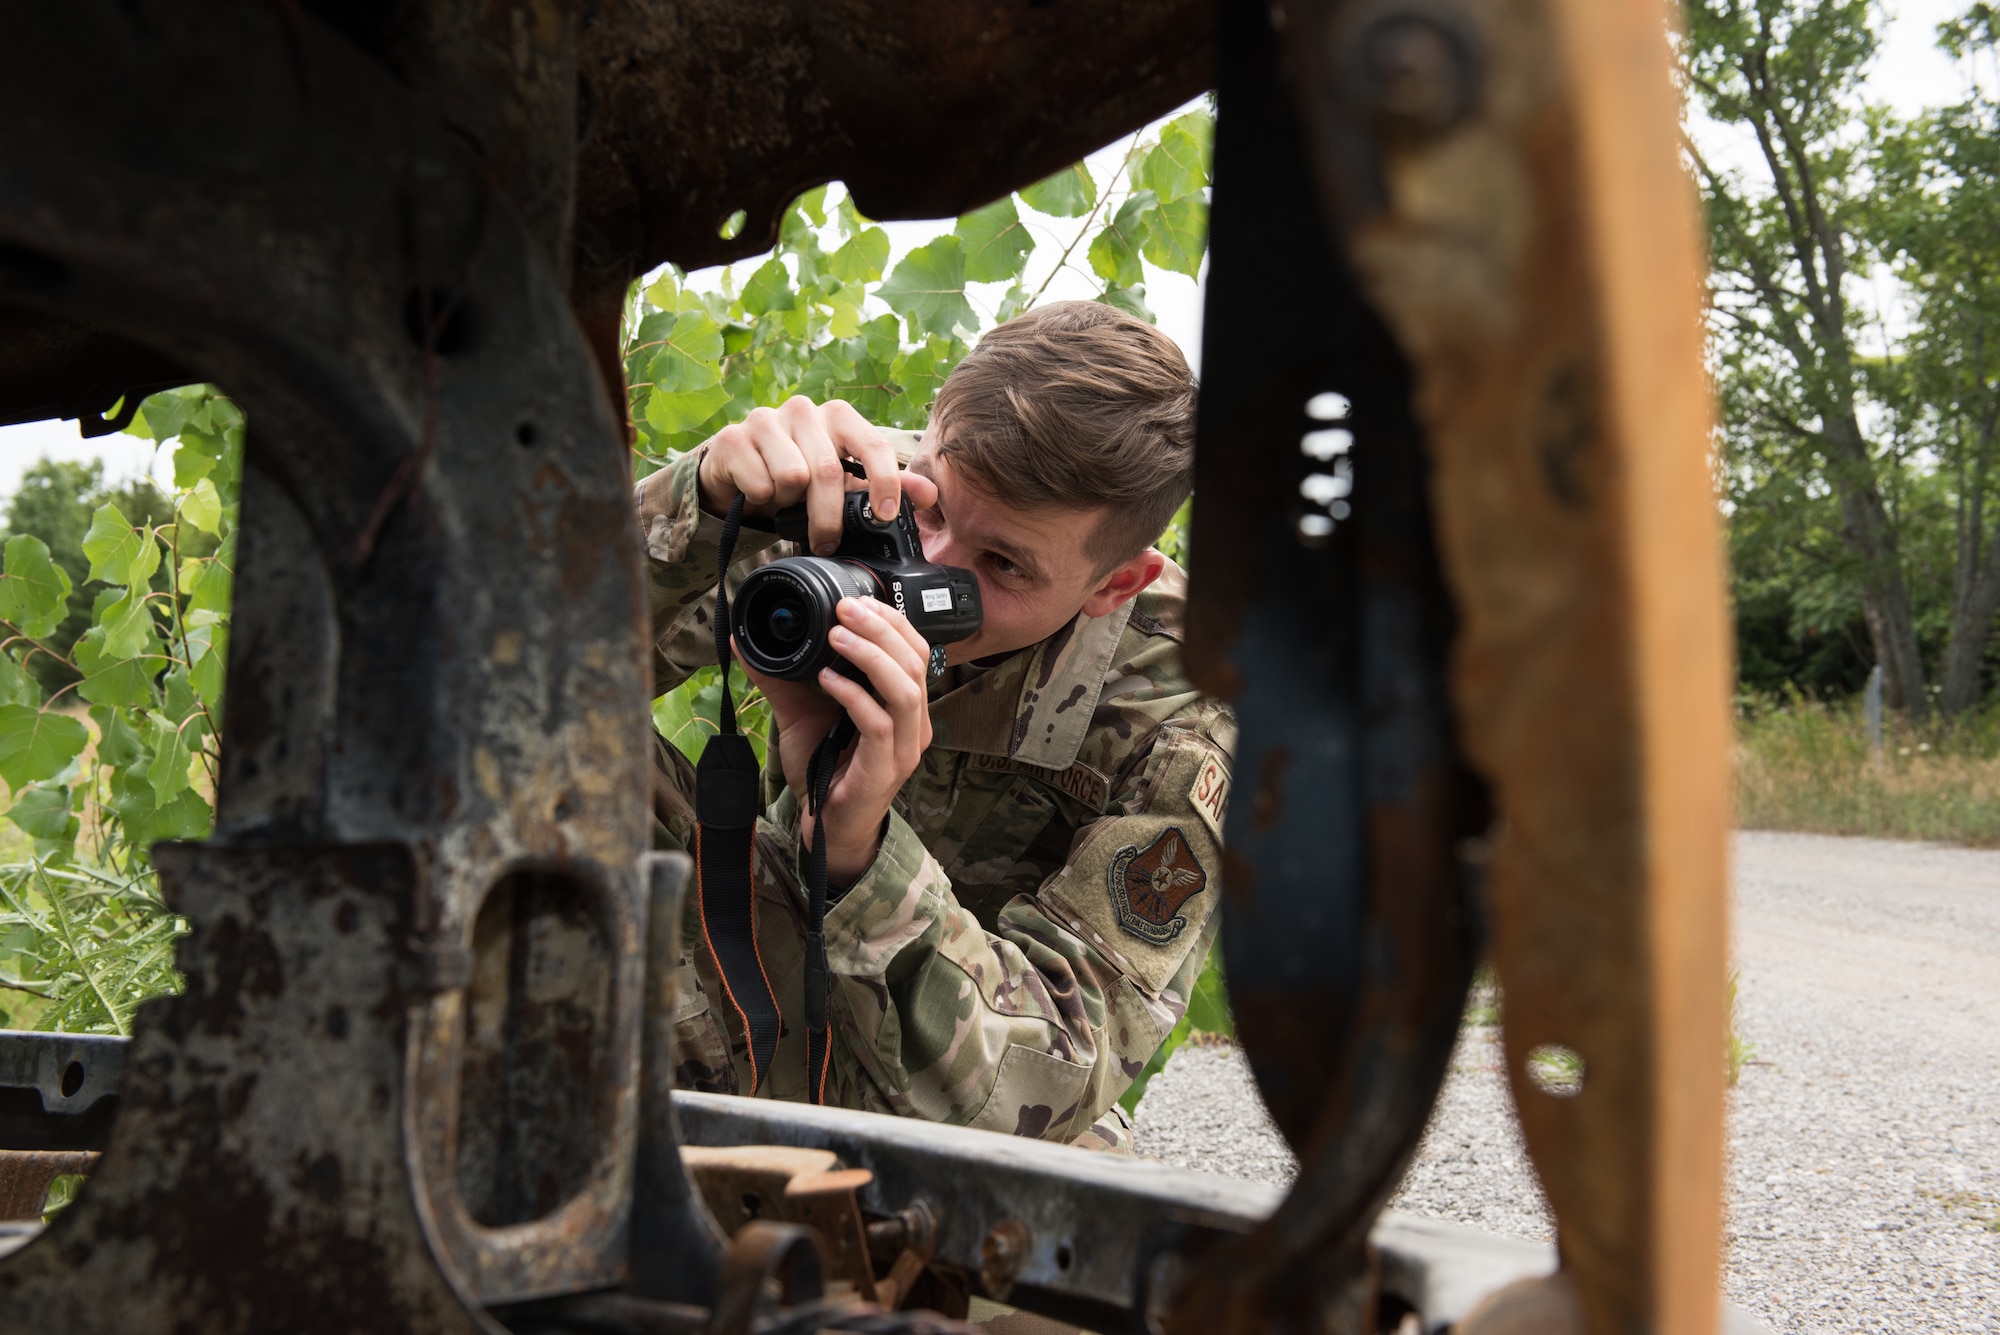 U.S. Air Force Tech. Sgt. Chase Bevill, 509th Bomb Wing safety specialist, takes a photo of a vehicle mishap at Whiteman Air Force Base, Missouri, on July 14, 2020. Safety specialists take investigative photos to assist with determining how the mishap occurred. (U.S. Air Force photo by Airman 1st Class Christina Carter)